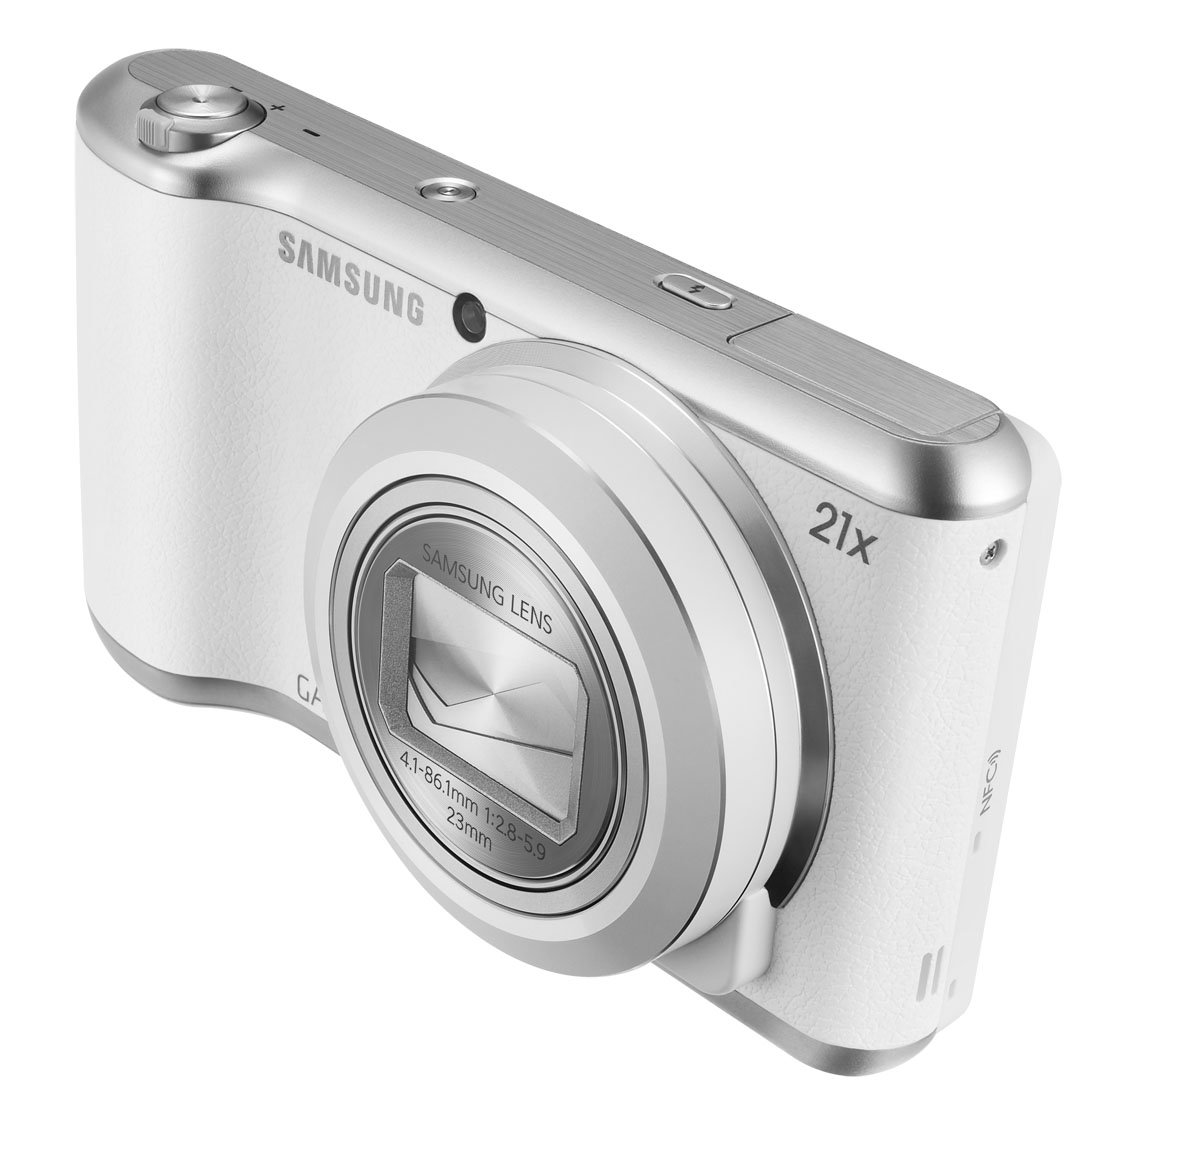 Samsung Galaxy Camera 2 16.3MP CMOS with 21x Optical Zoom and 4.8